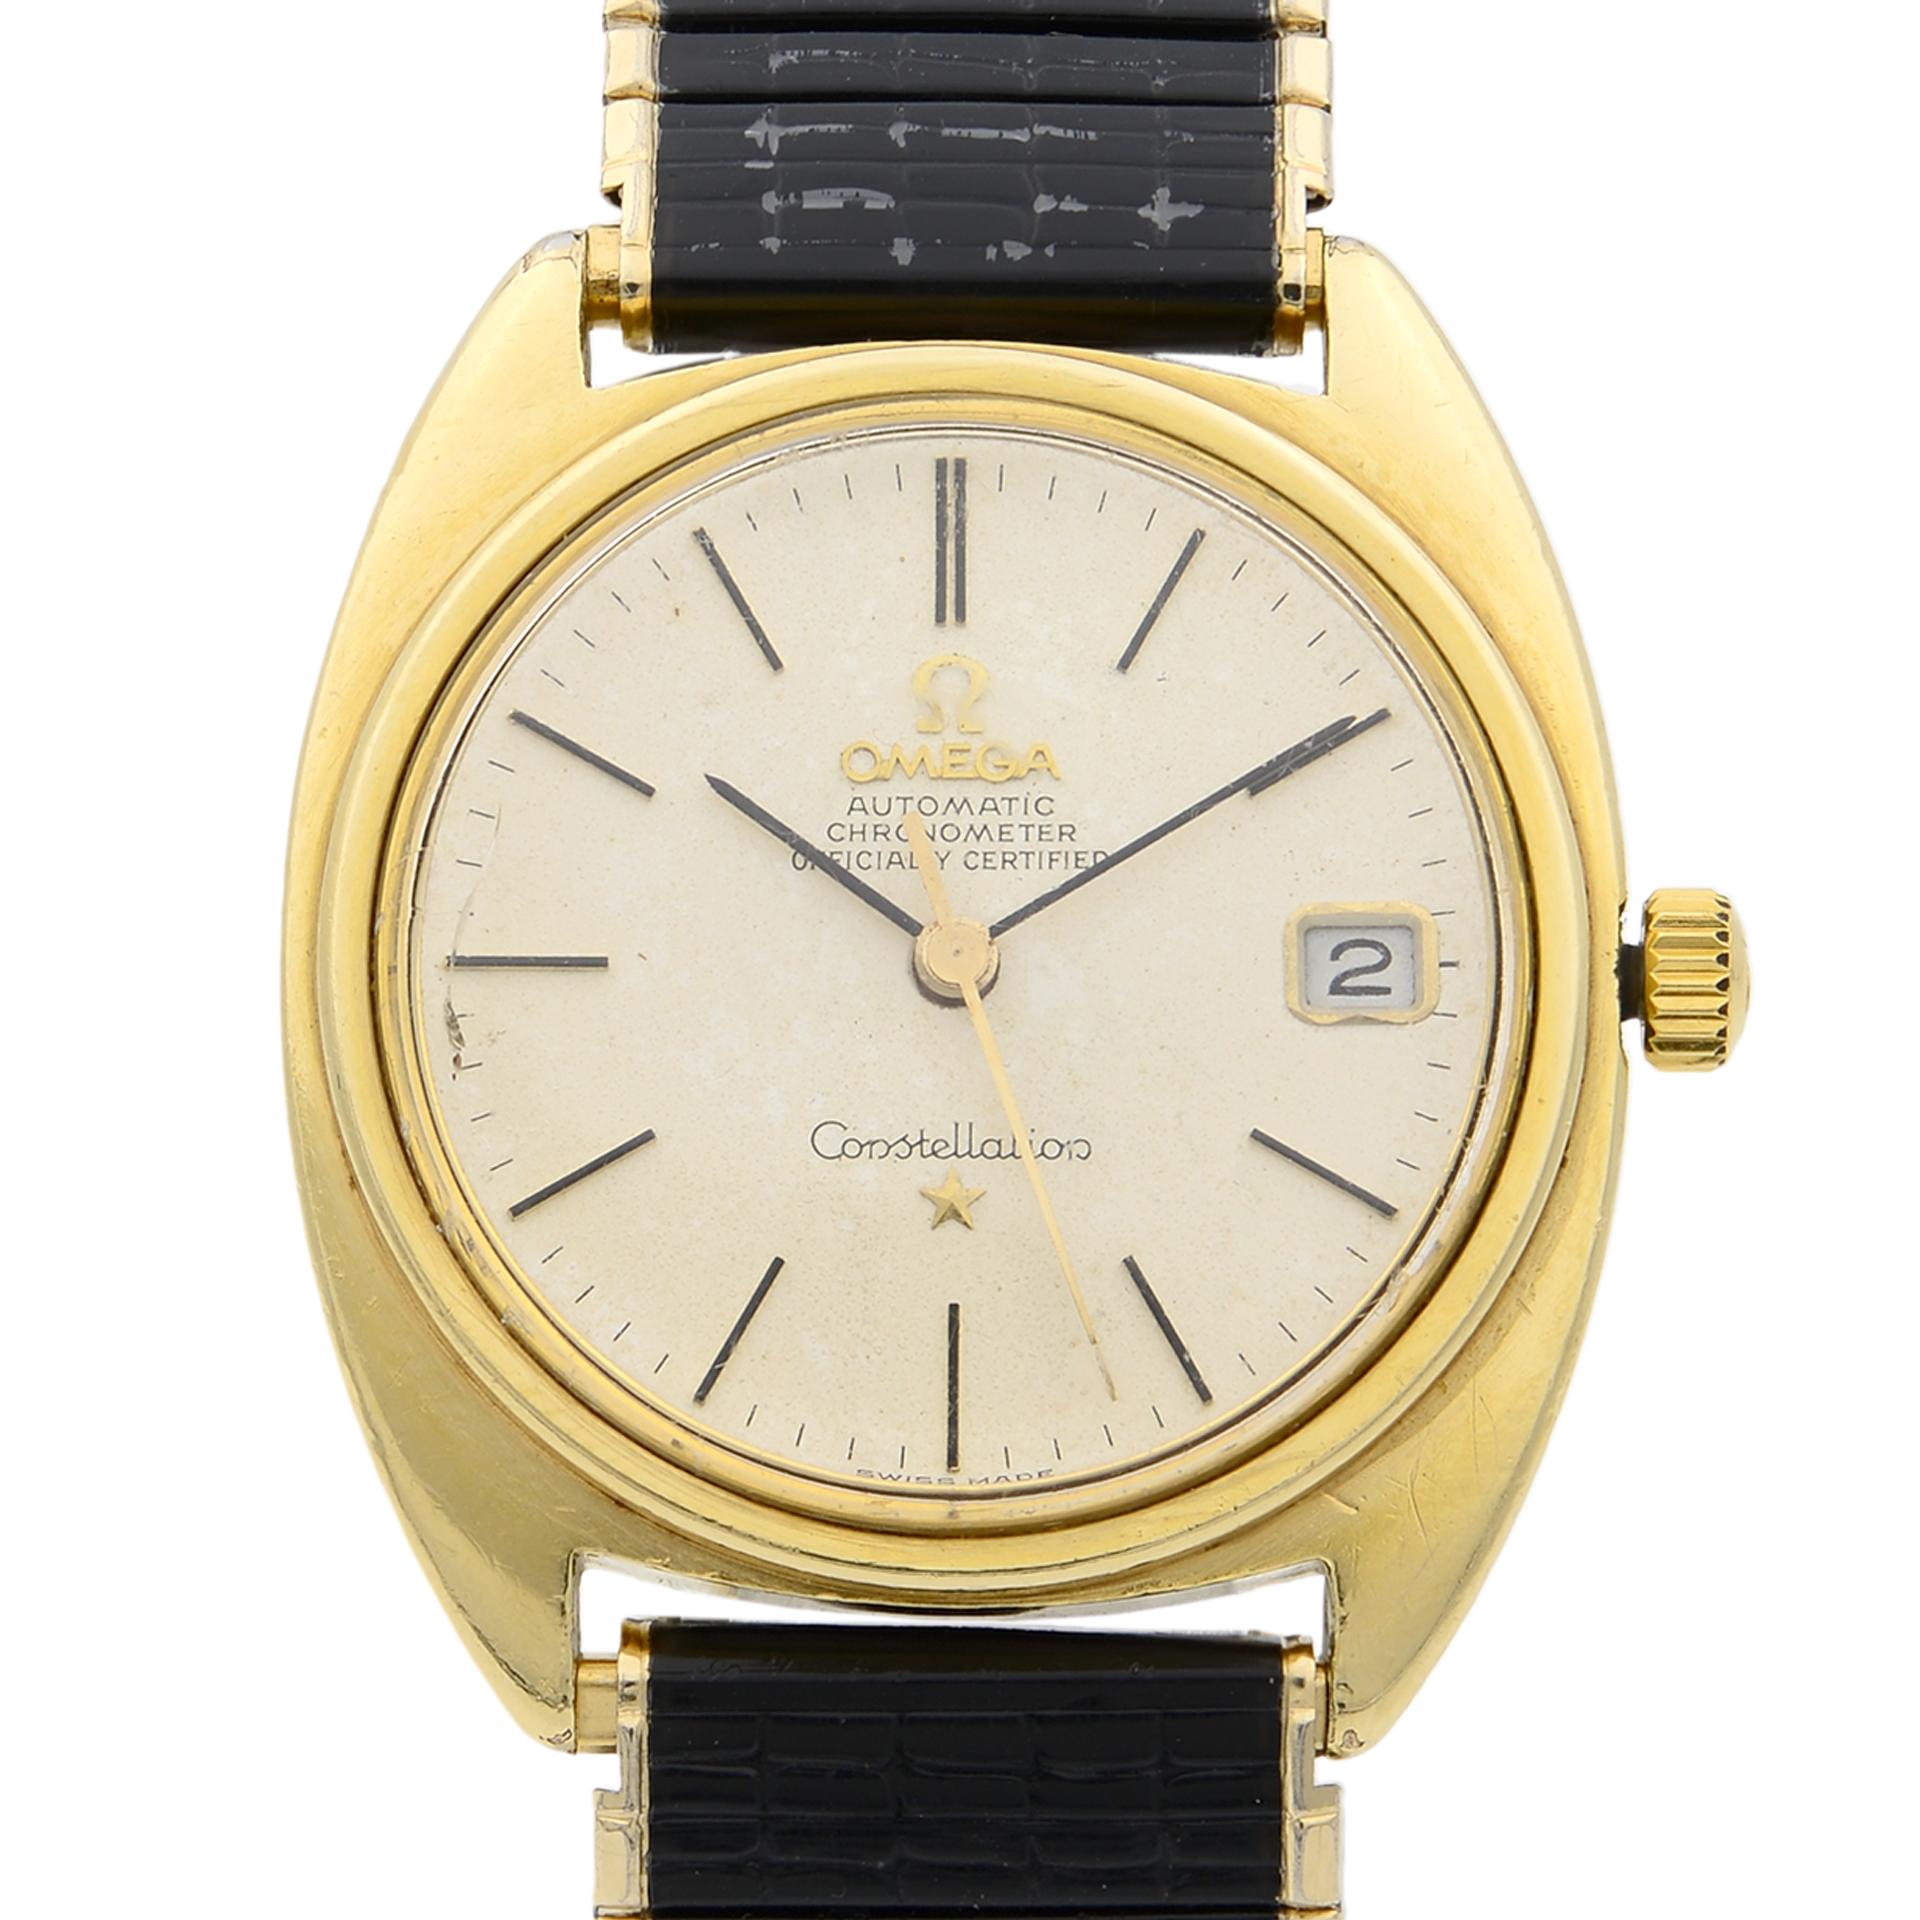 This pre-owned Omega Constellation  168.017 is a beautiful men's timepiece that is powered by mechanical (automatic) movement which is cased in a stainless steel case. It has a round shape face, date indicator dial and has hand sticks style markers.